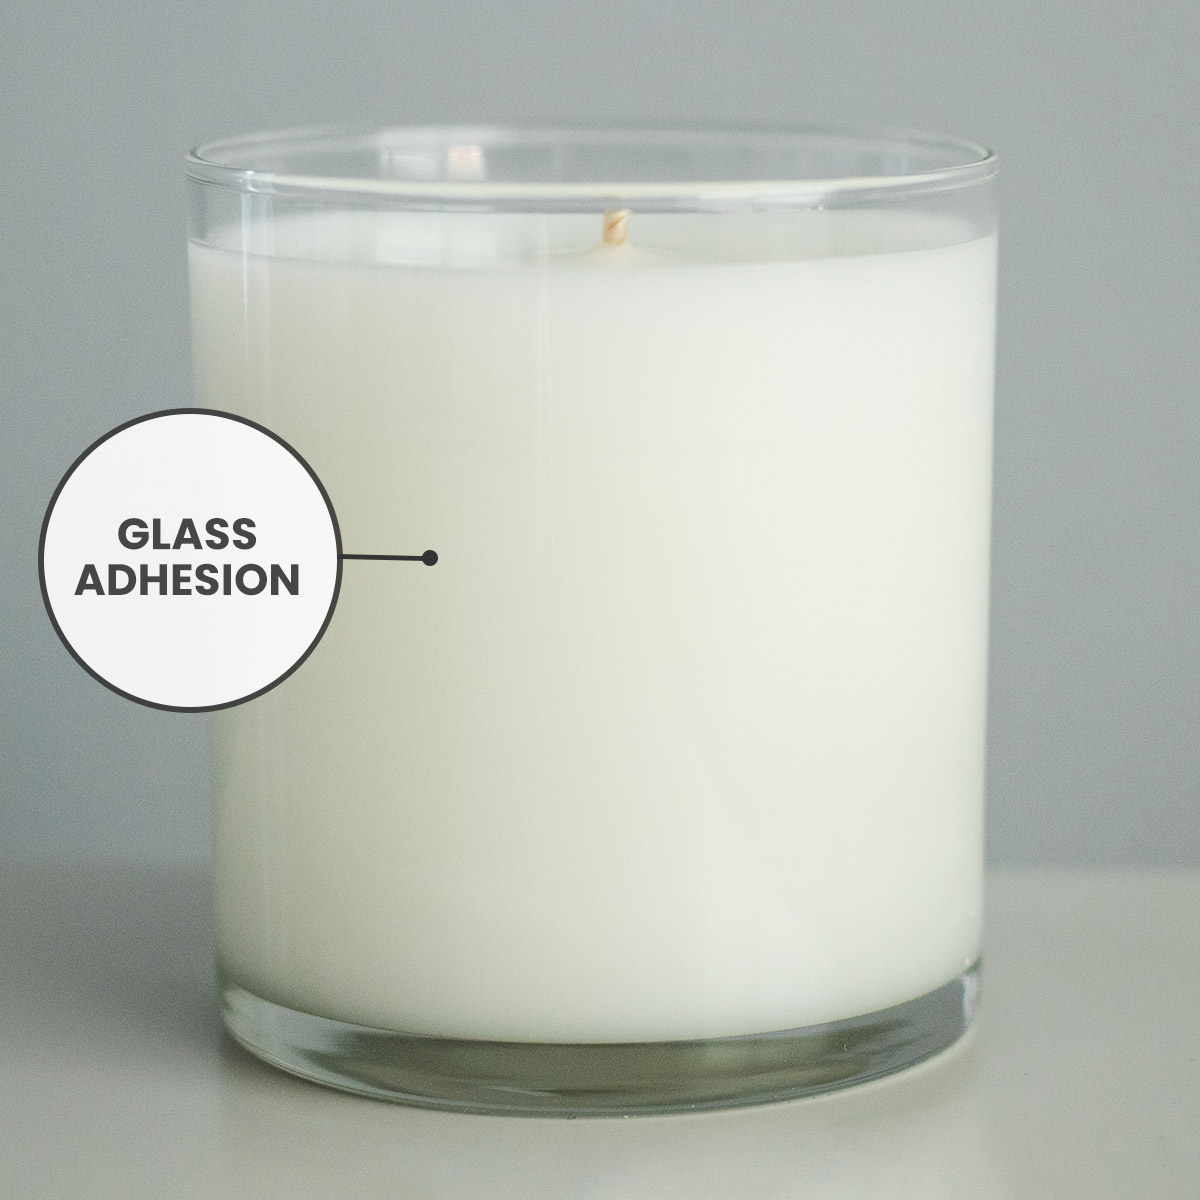 Candle showing excellent glass adhesion